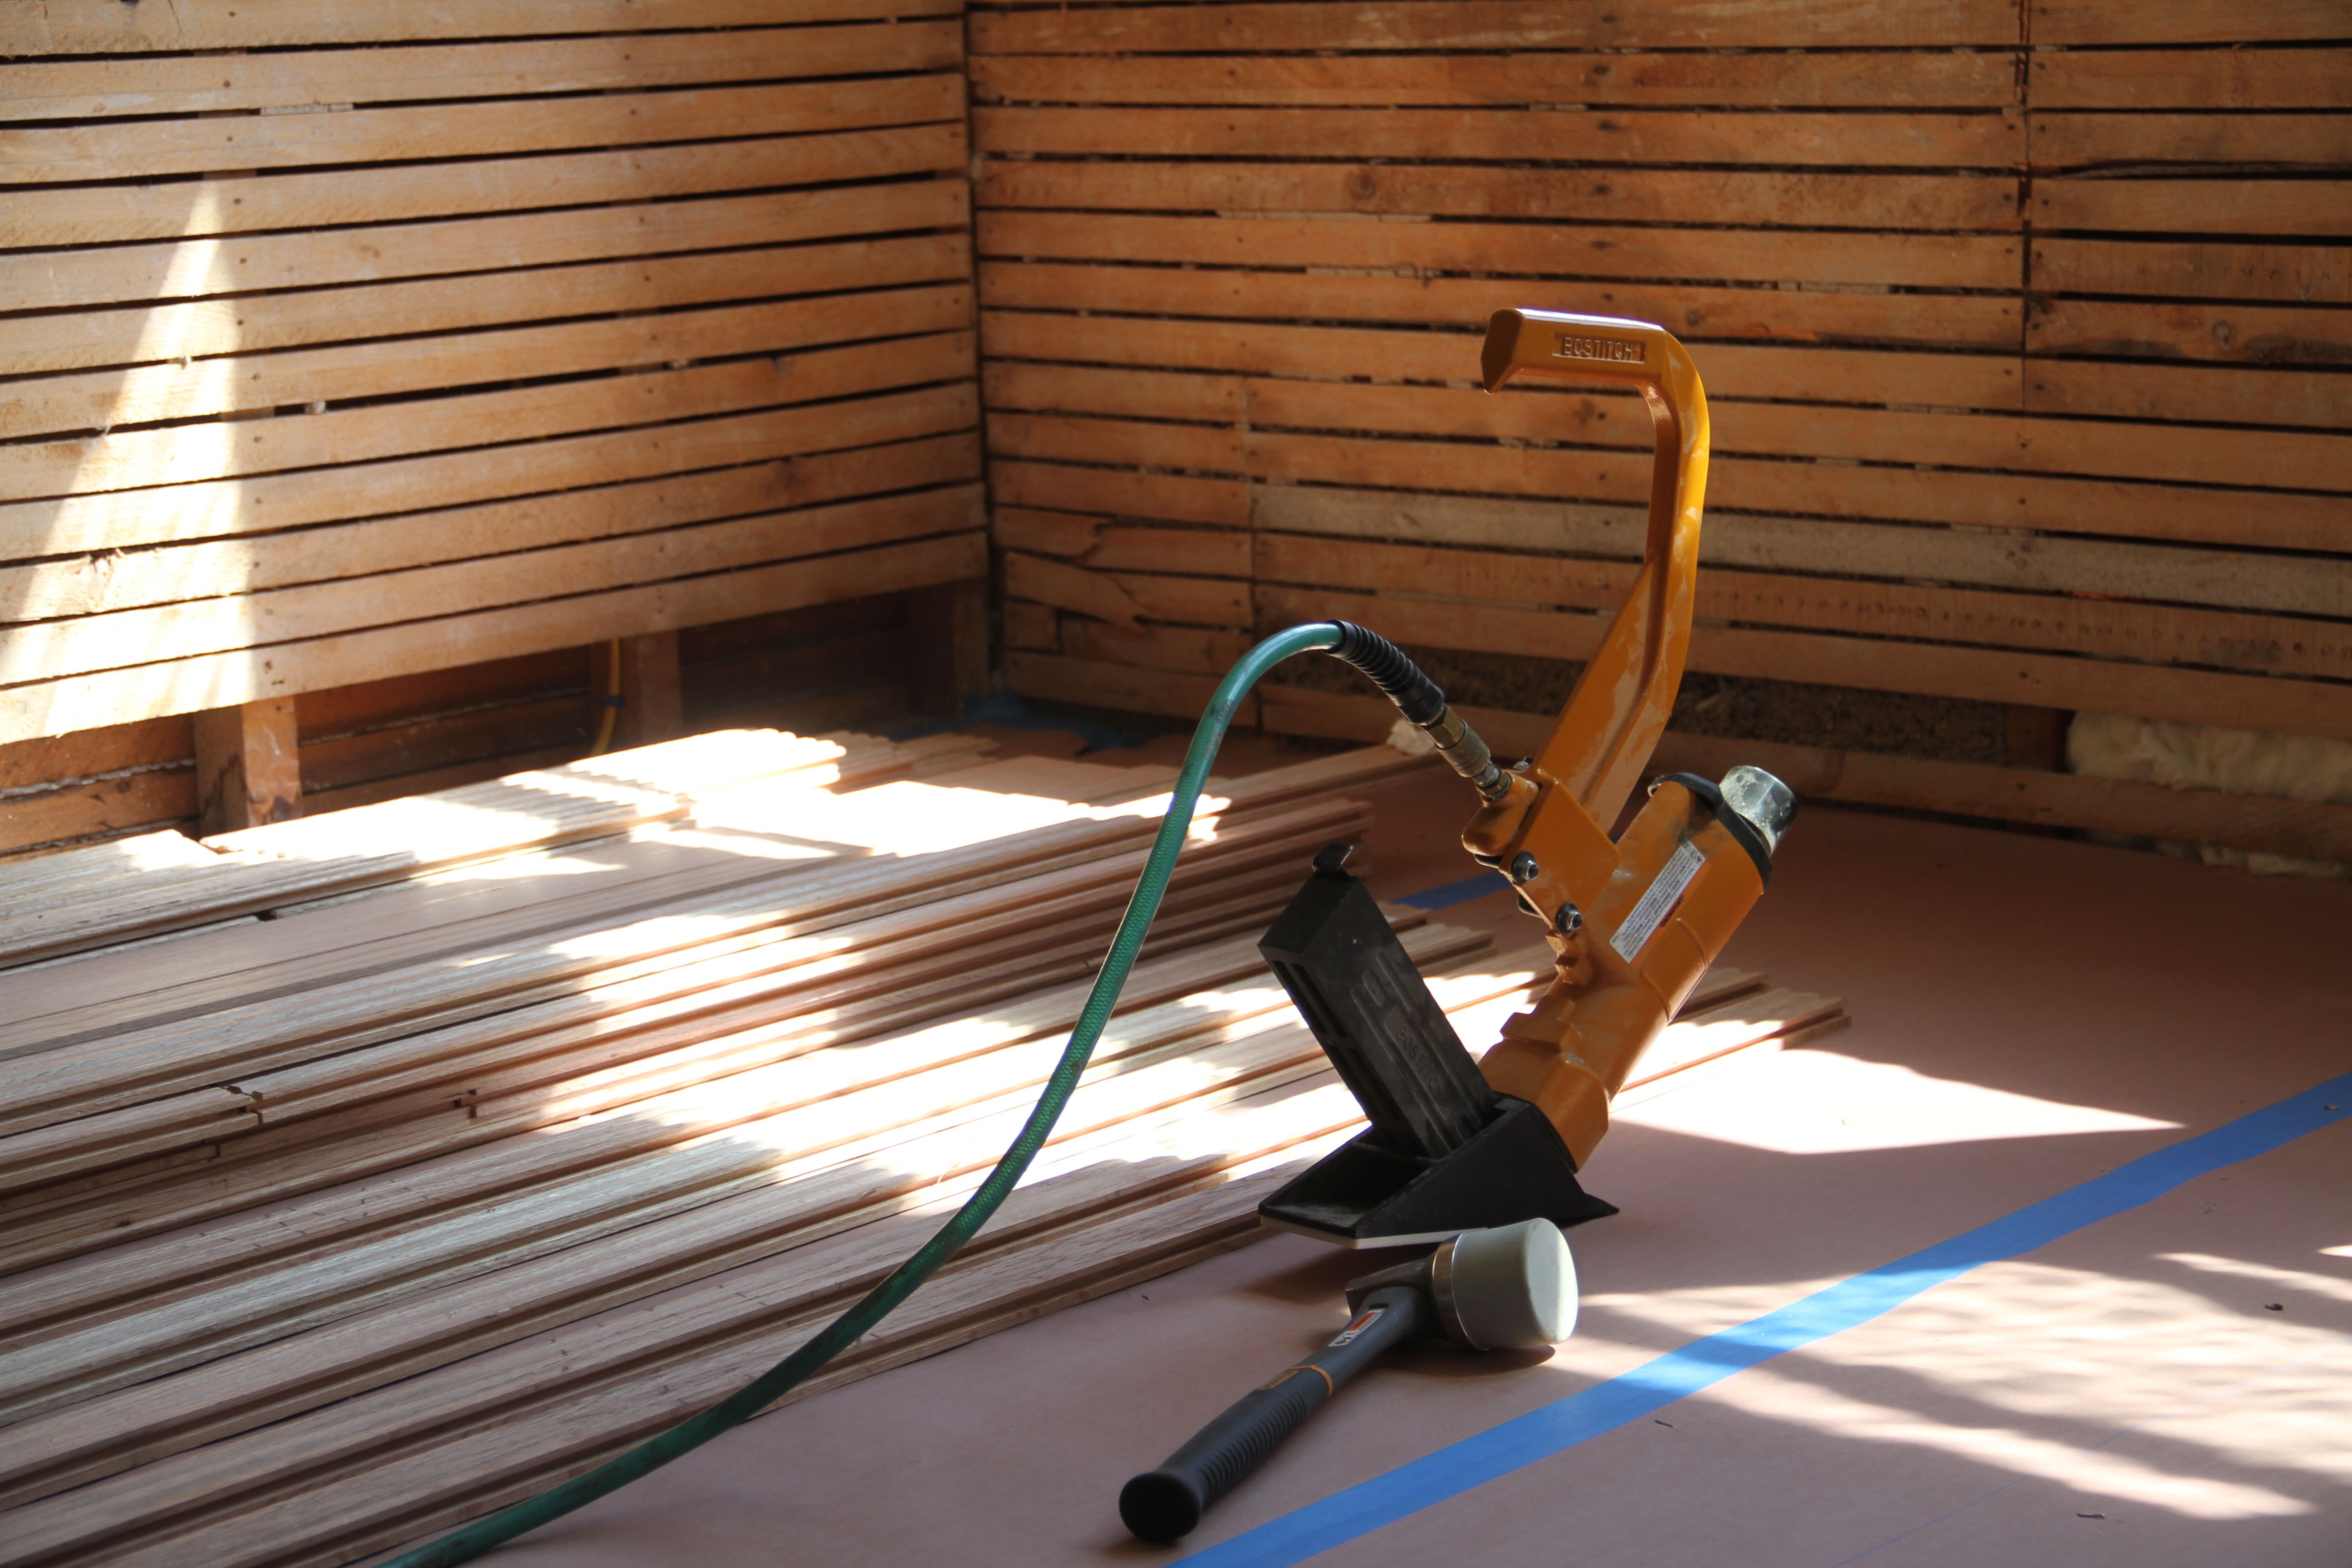 Flooring and nailer and lovely morning light.